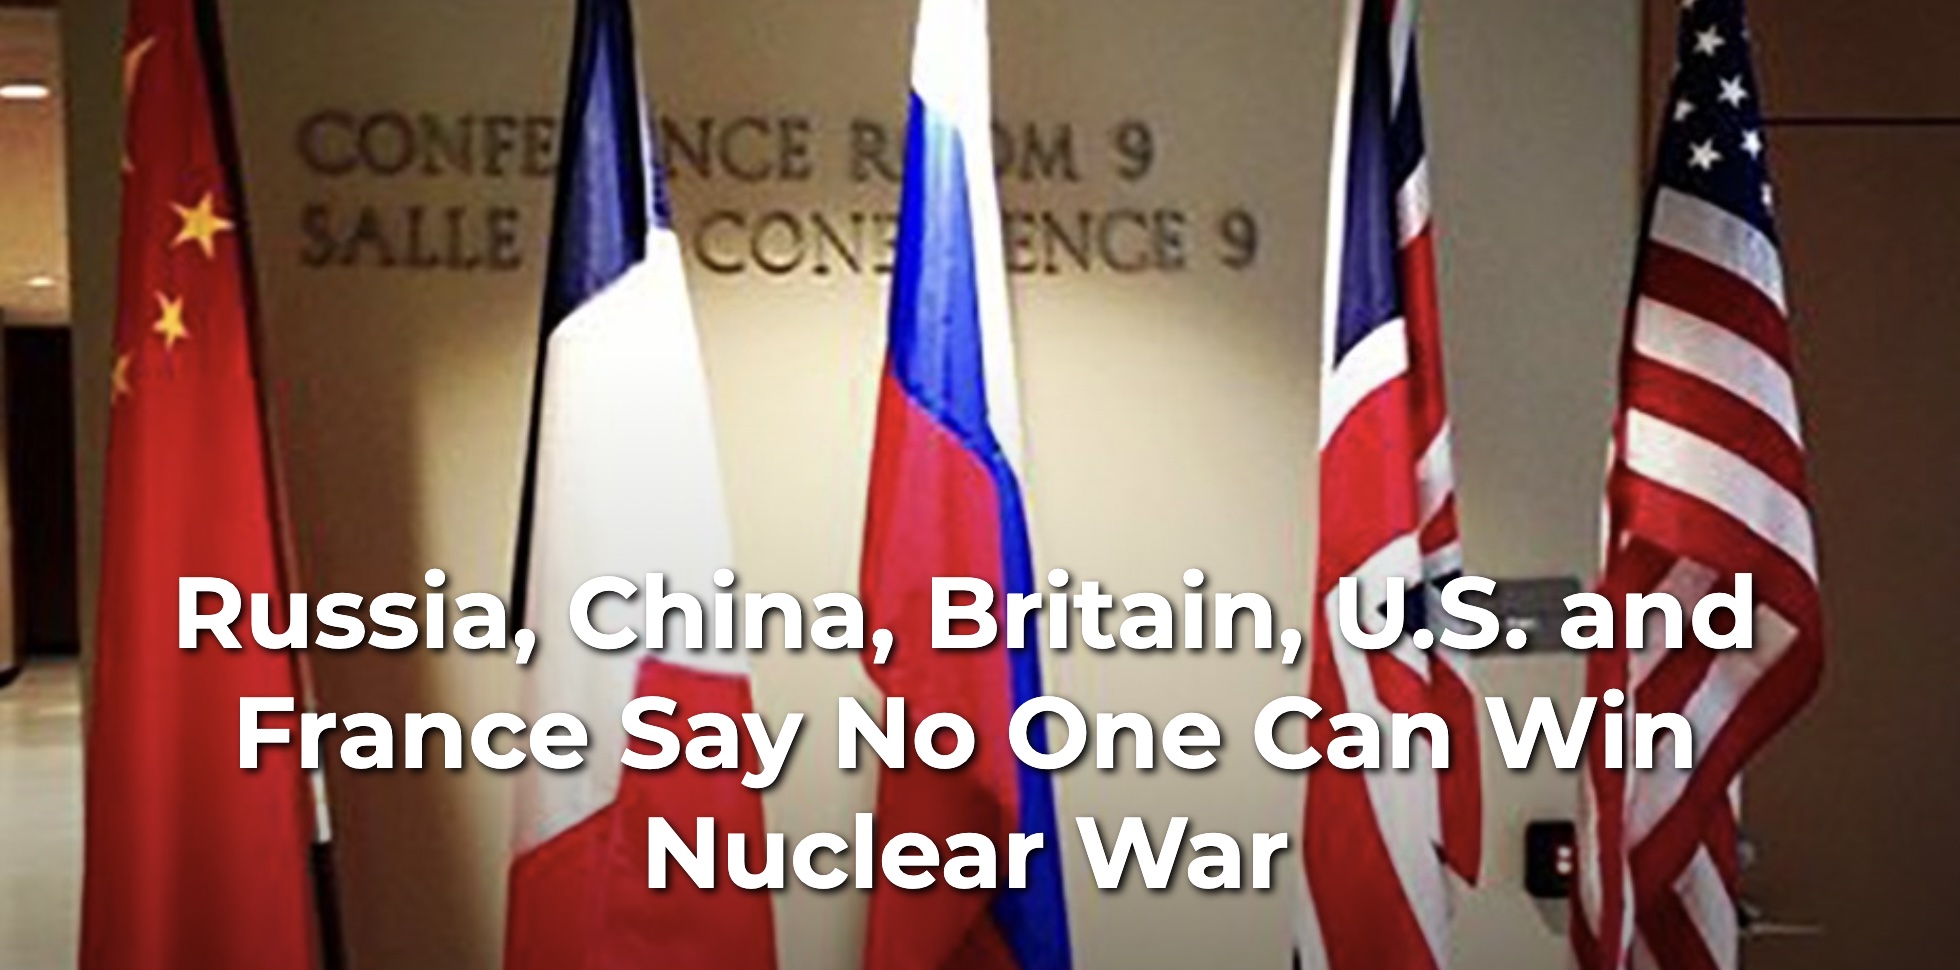 Russia, China, Britain, U.S. and France say no one can win nuclear war